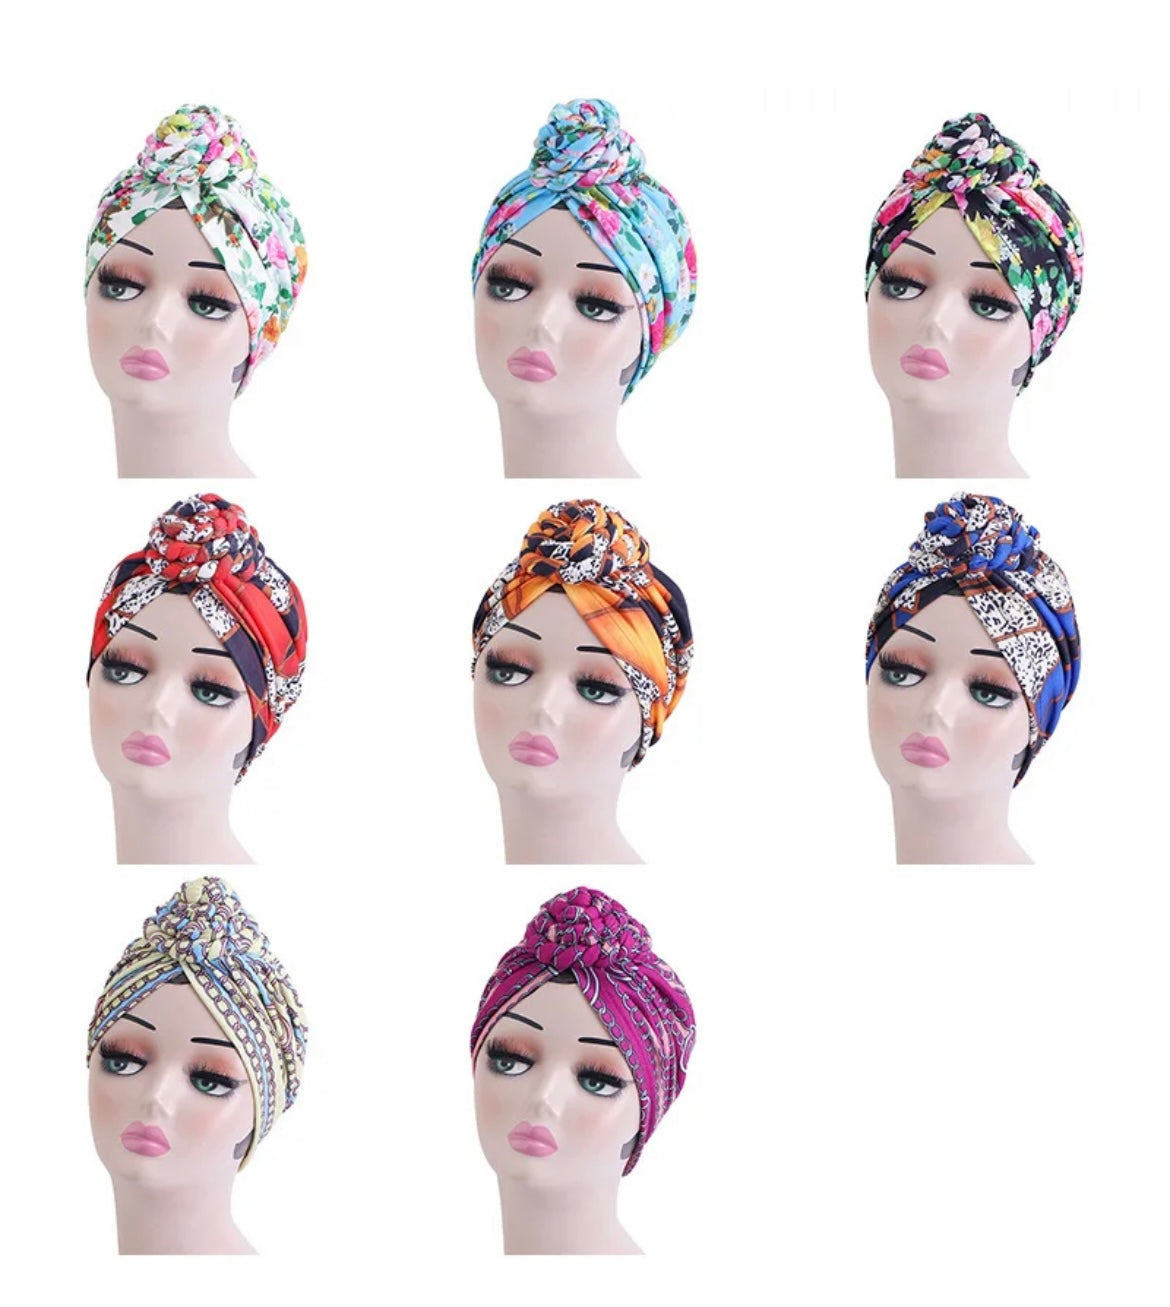 Personalized Hair Wraps, Knotted Ladies Night Cap, Ladies Bonnet, Ethnic Bandanas, Bandanas, Hair Accessories, Hair Caps, Hair Bonnet, Unique Gifts, Gifts for Girls, Gifts for Women